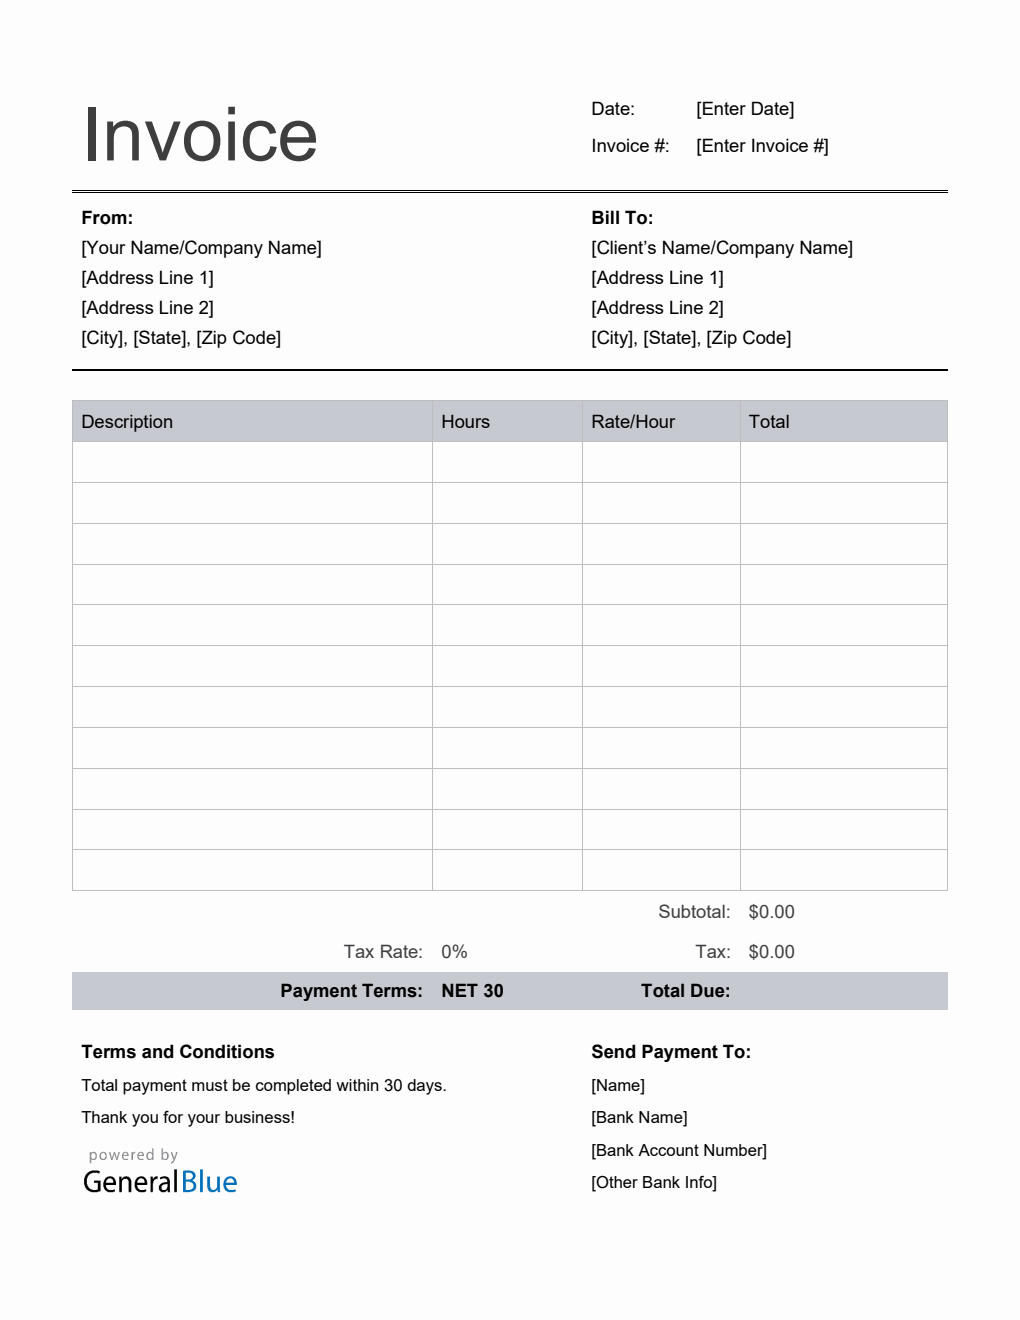 Freelance Hourly Invoice with Tax Calculation in Word (Basic)